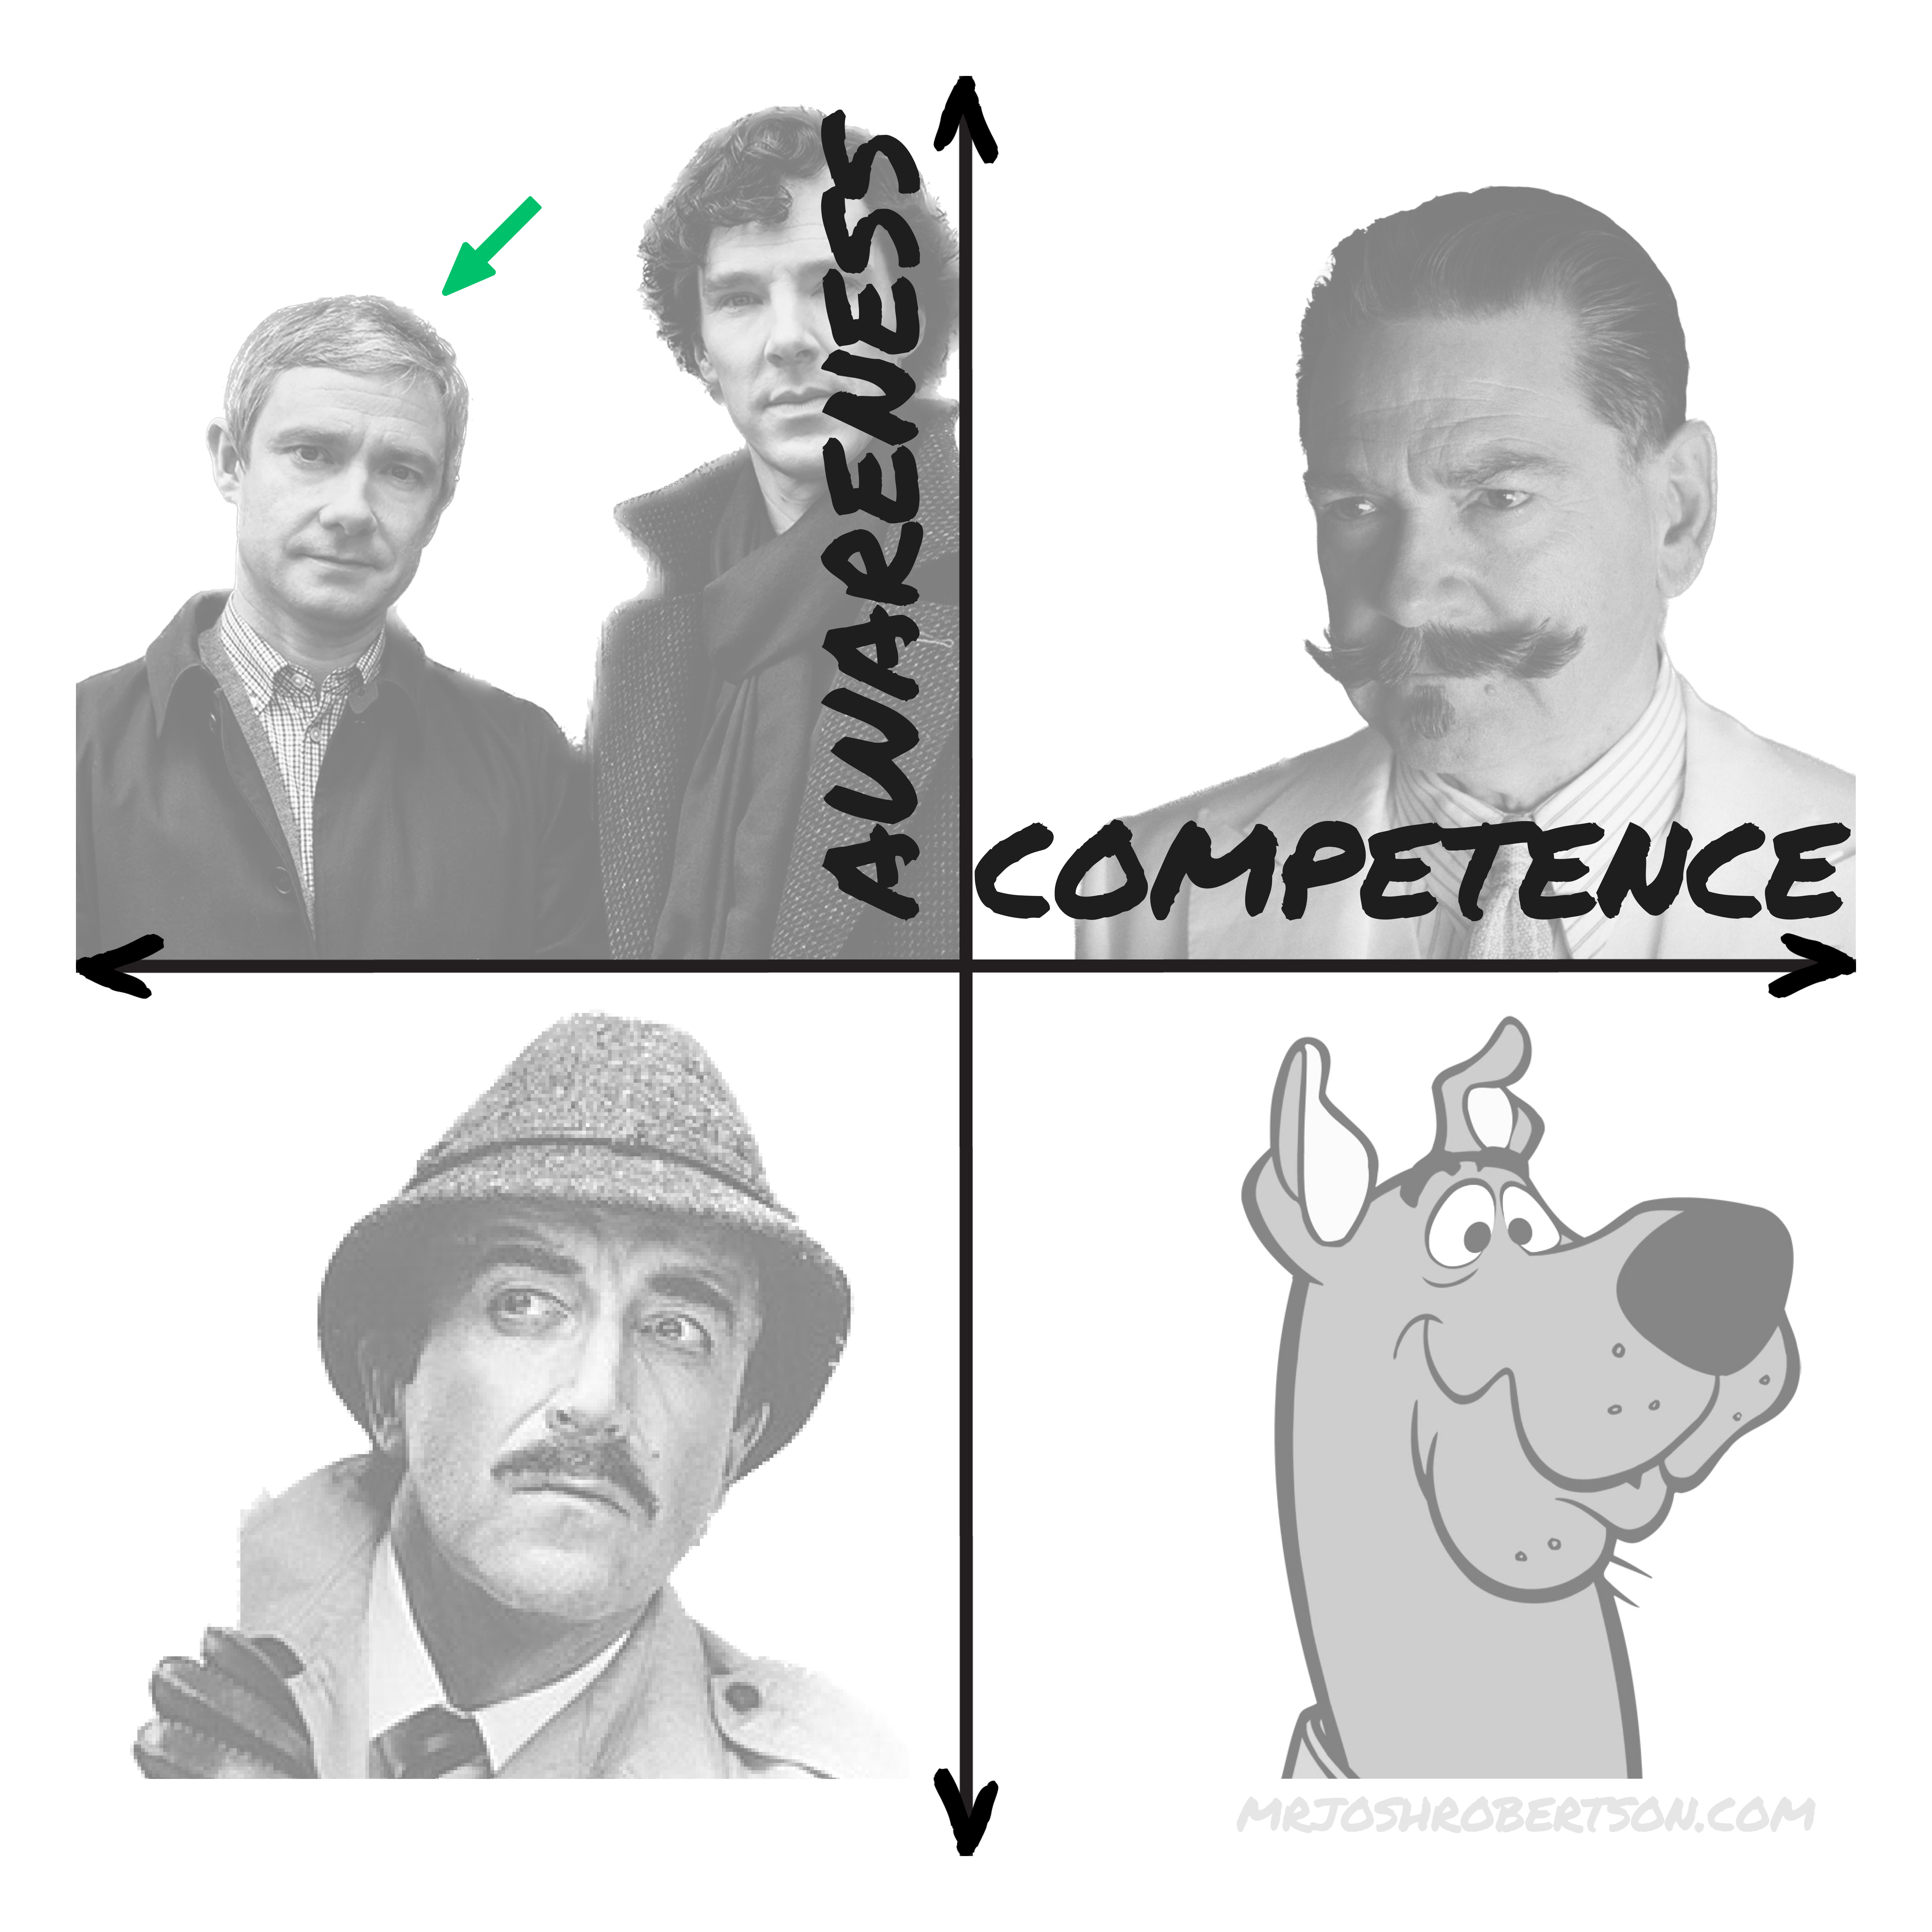 2x2 chart of the Four Stages of Competence with fictional detectives. Y-axis: 'Awareness,' X-axis: 'Competence.' Top-left, 'Conscious Incompetence': Dr. John Watson from 'Sherlock Holmes.' Top-right, 'Conscious Competence': Hercule Poirot from 'Agatha Christie's Poirot.' Bottom-left, 'Unconscious Incompetence': Inspector Clouseau from 'The Pink Panther.' Bottom-right, 'Unconscious Competence': Scooby-Doo and the Mystery Inc. gang. Chart shows progression of detective skills.